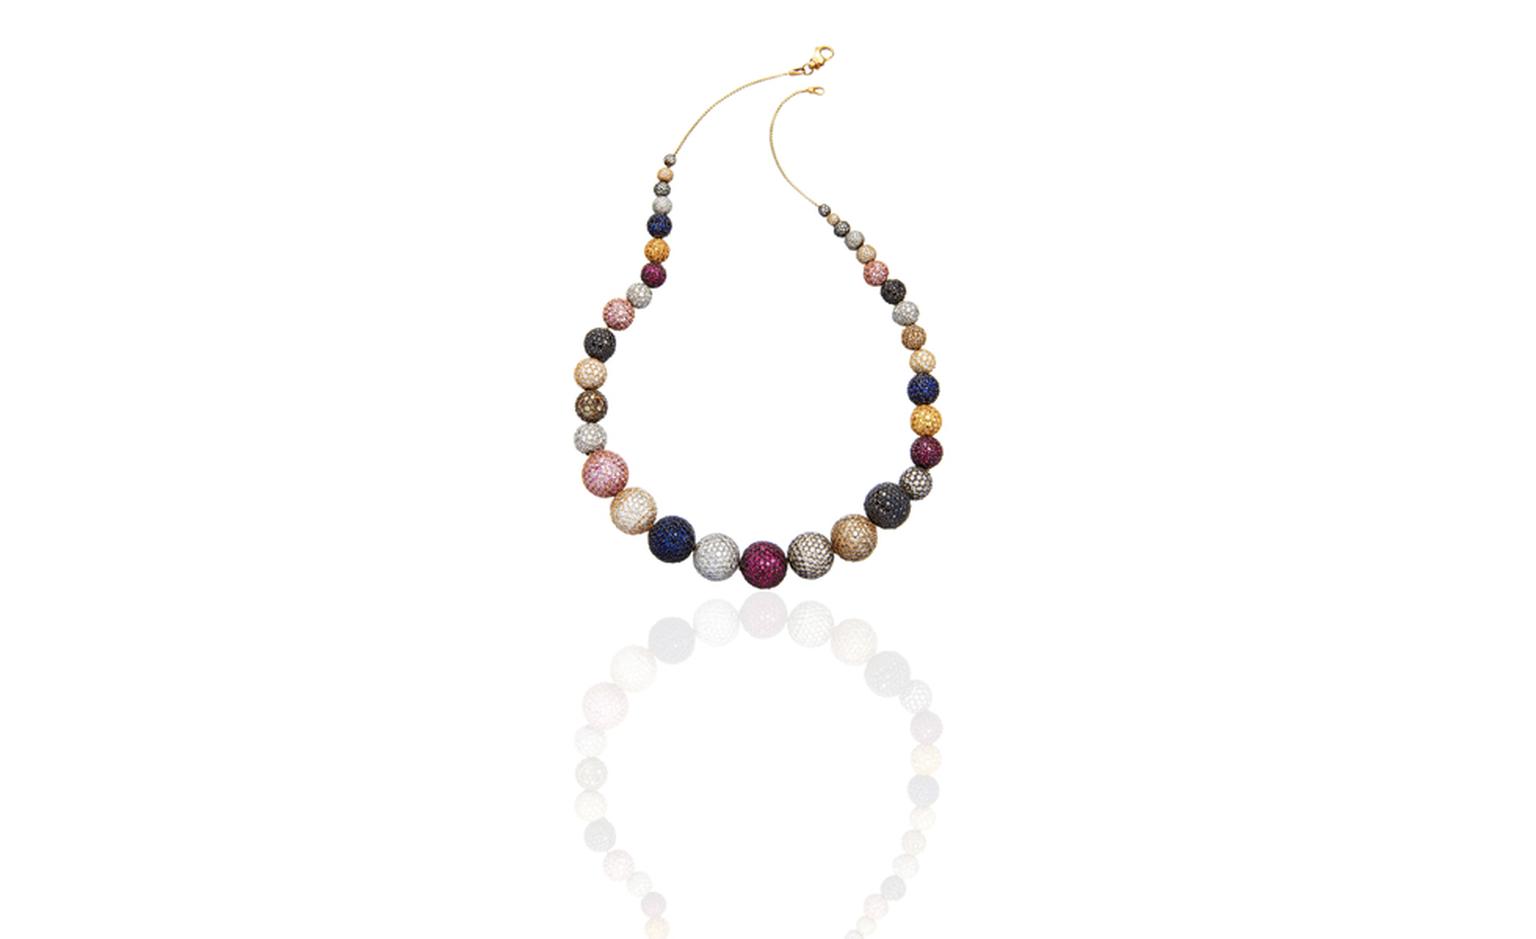 Astley Clarke Takara Naiya Multi Ball necklace in white and yellow gold with diamonds and sapphires, £60,000